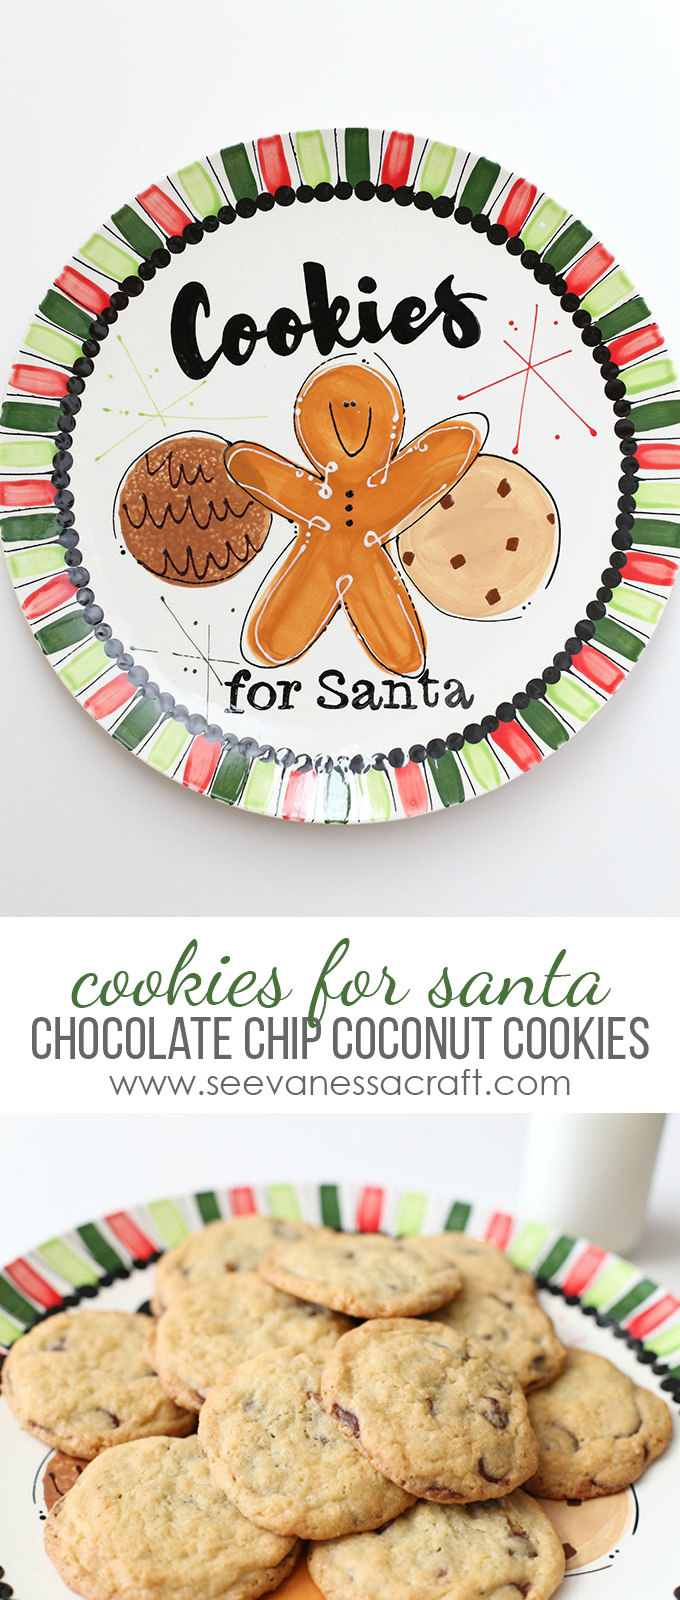 chocolate-chip-coconut-cookies-for-santa-copy